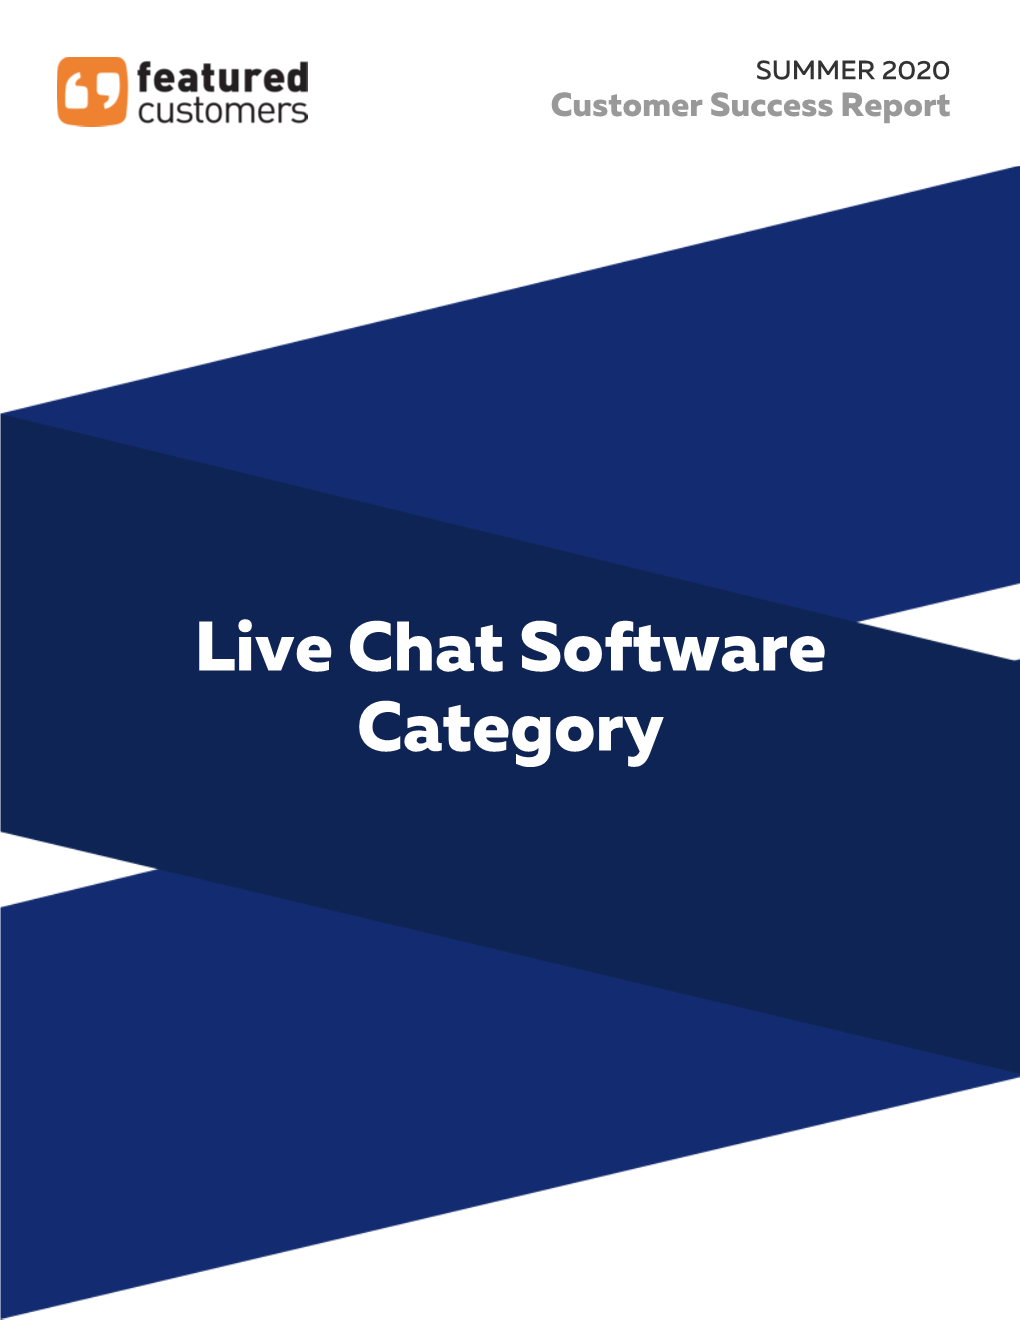 SUMMER 2020 Live Chat Software Category